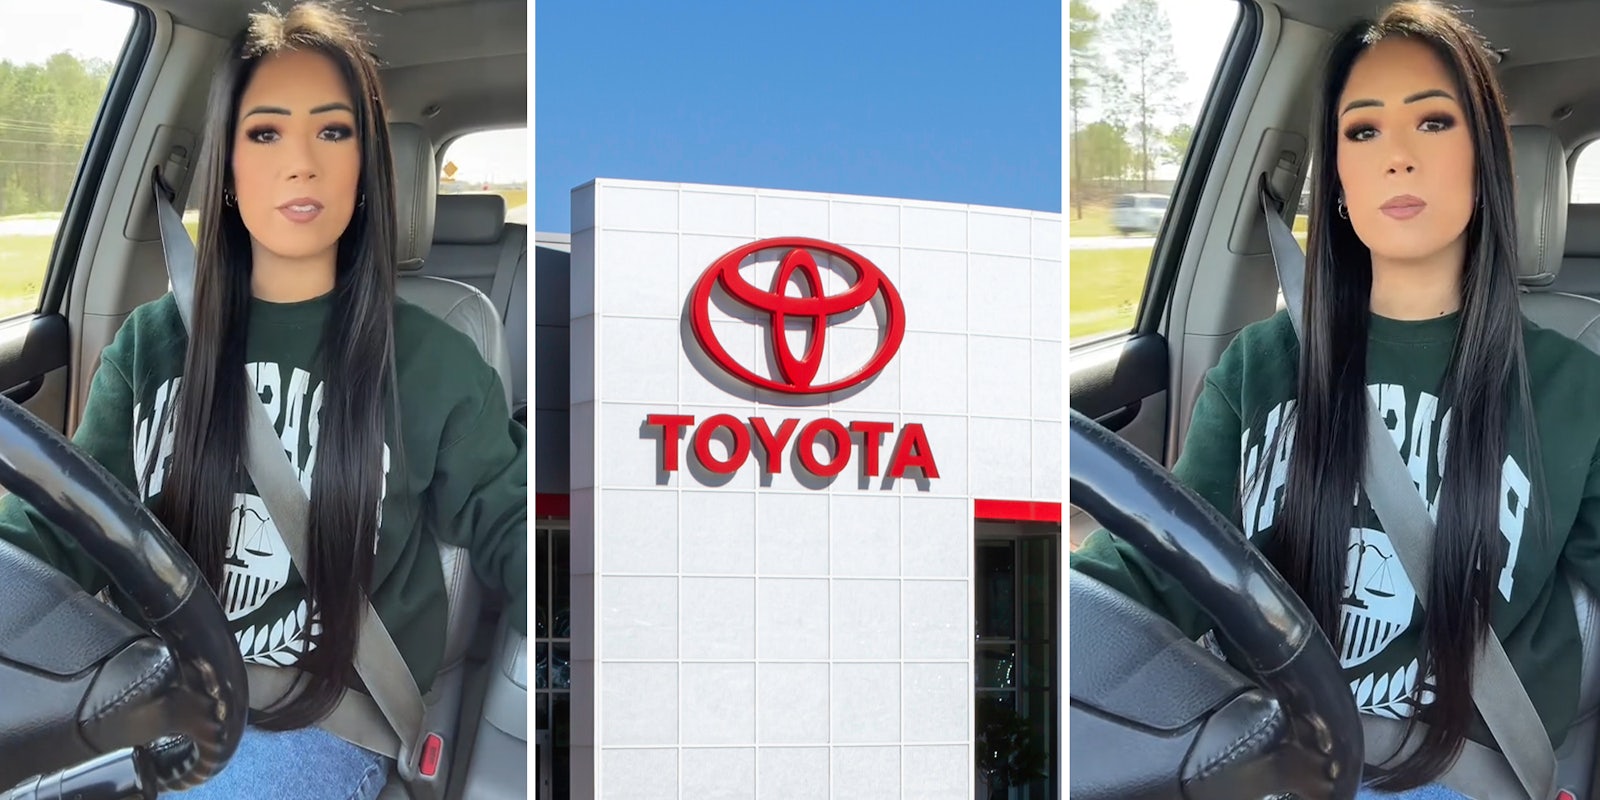 Woman goes to Toyota dealership by herself for Camry or Corolla.